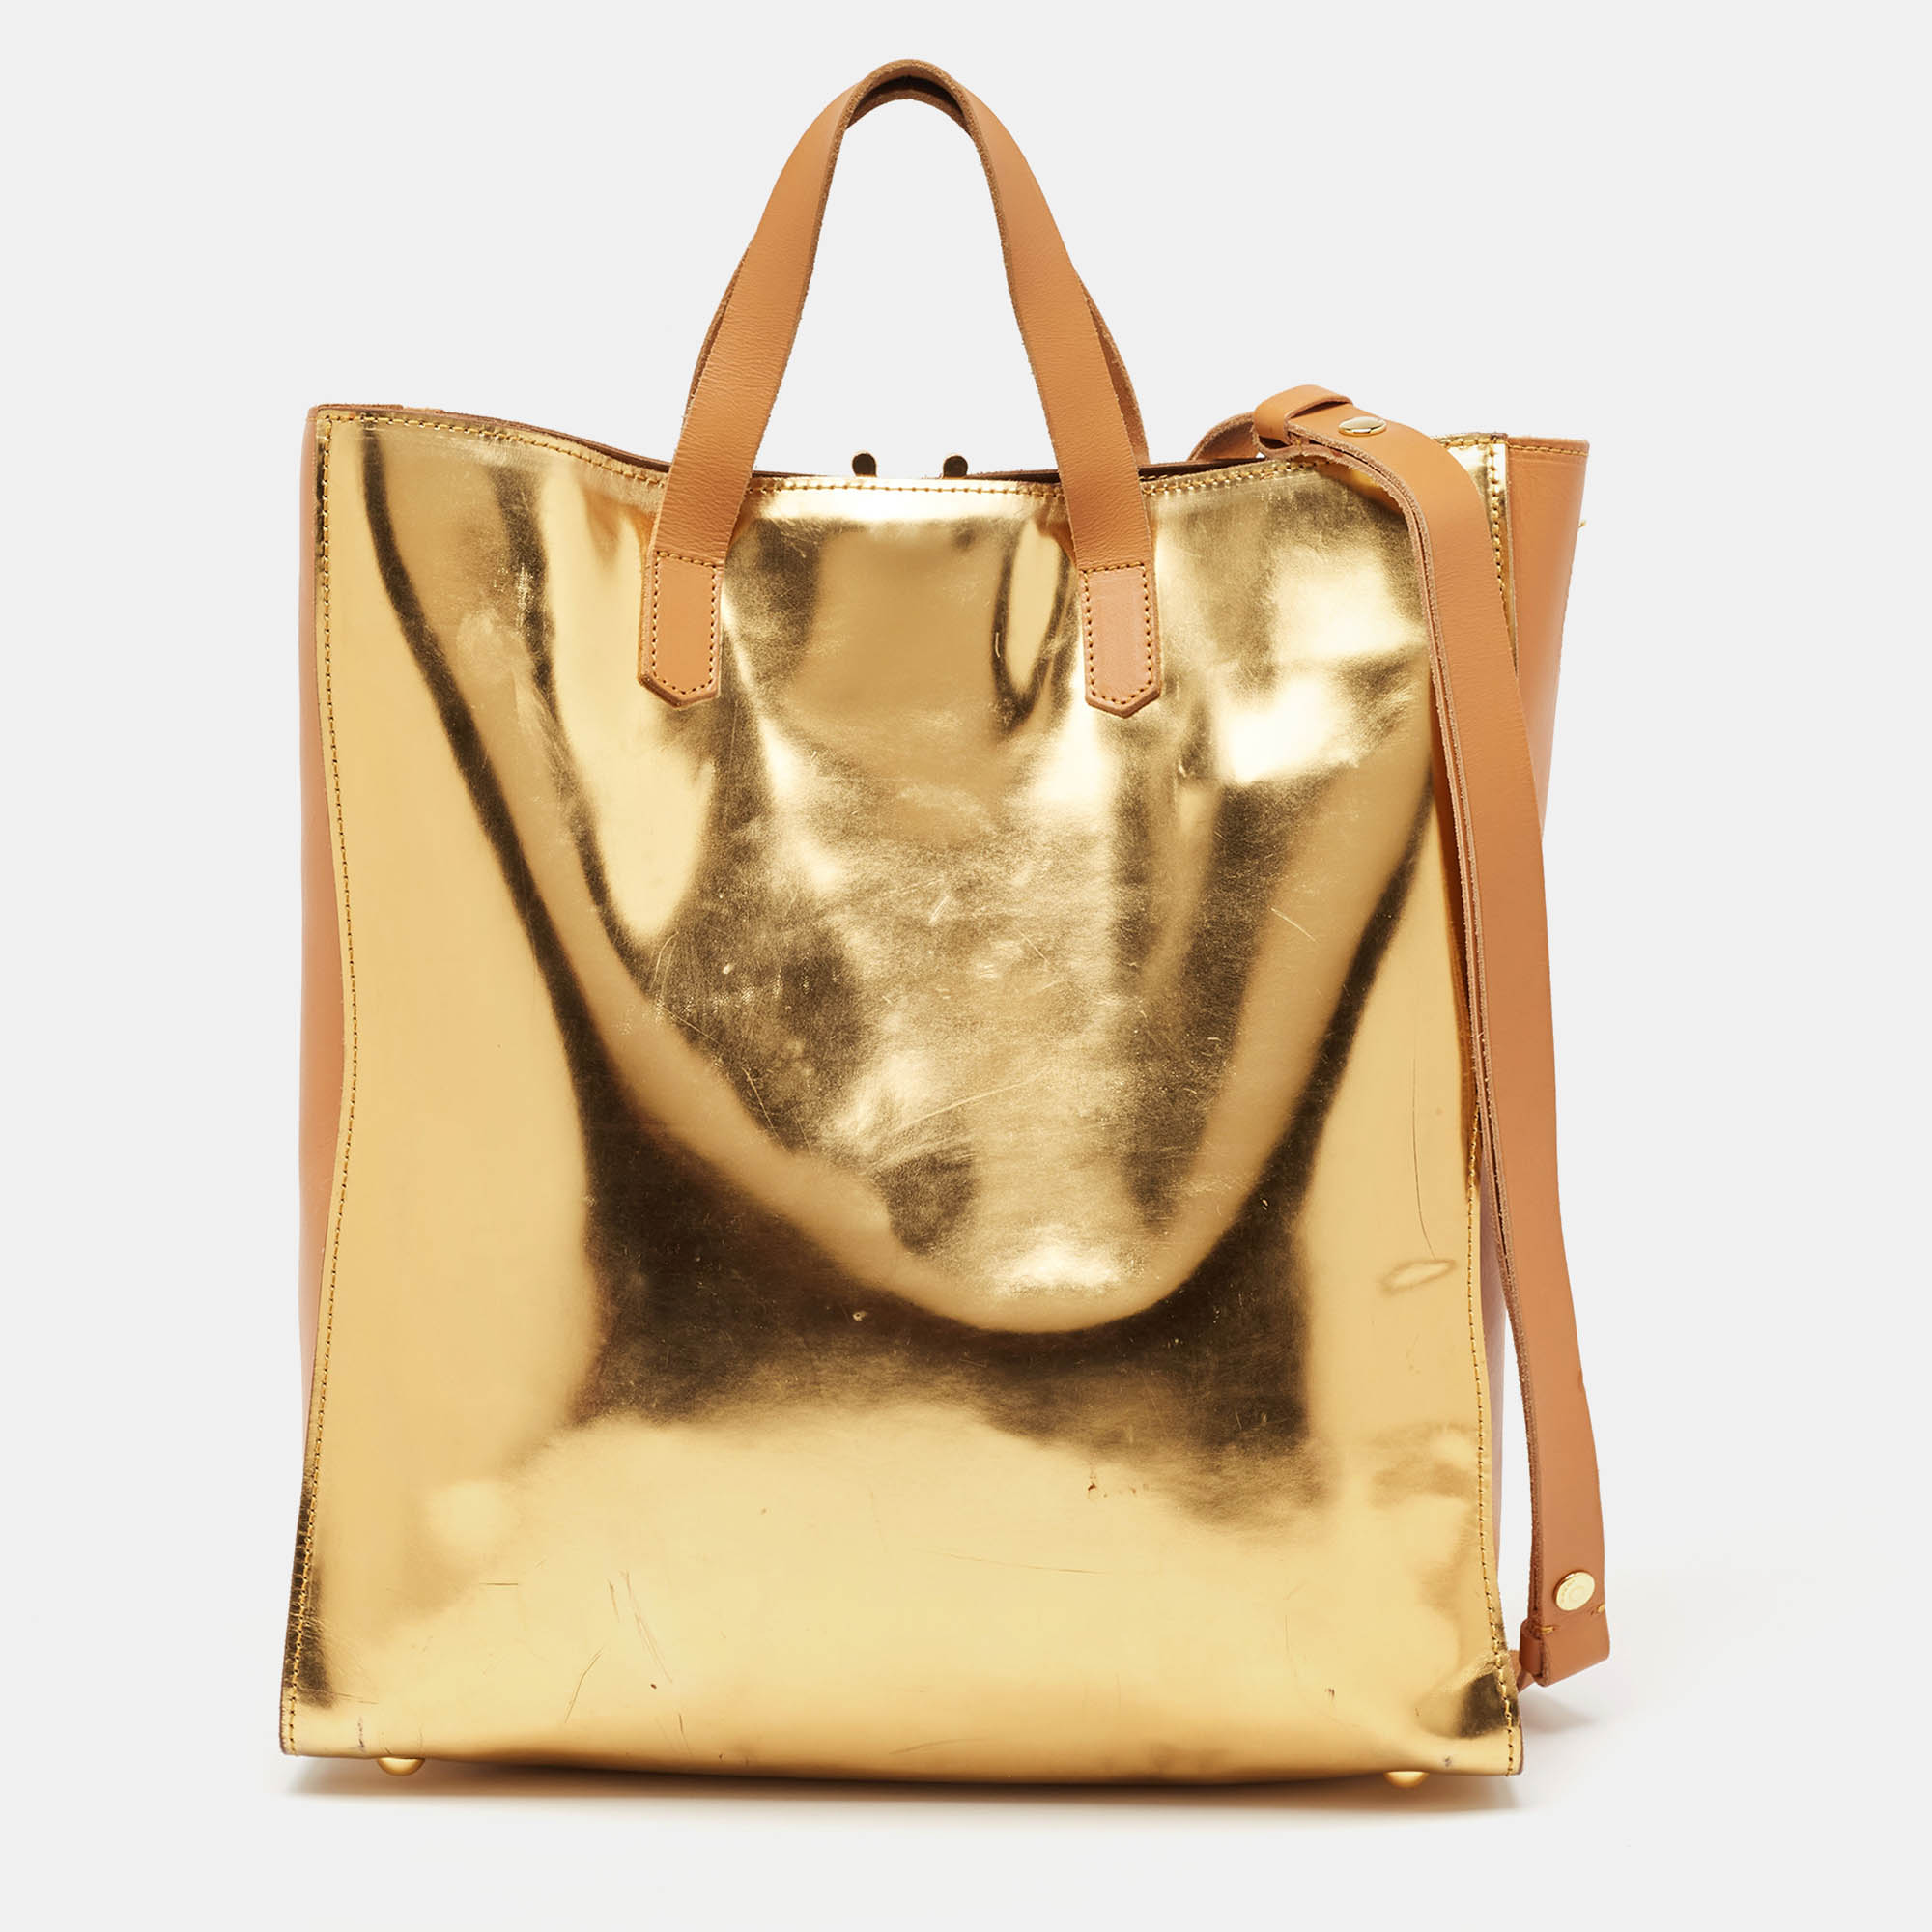 Marni gold/beige patent and leather pushlock tote